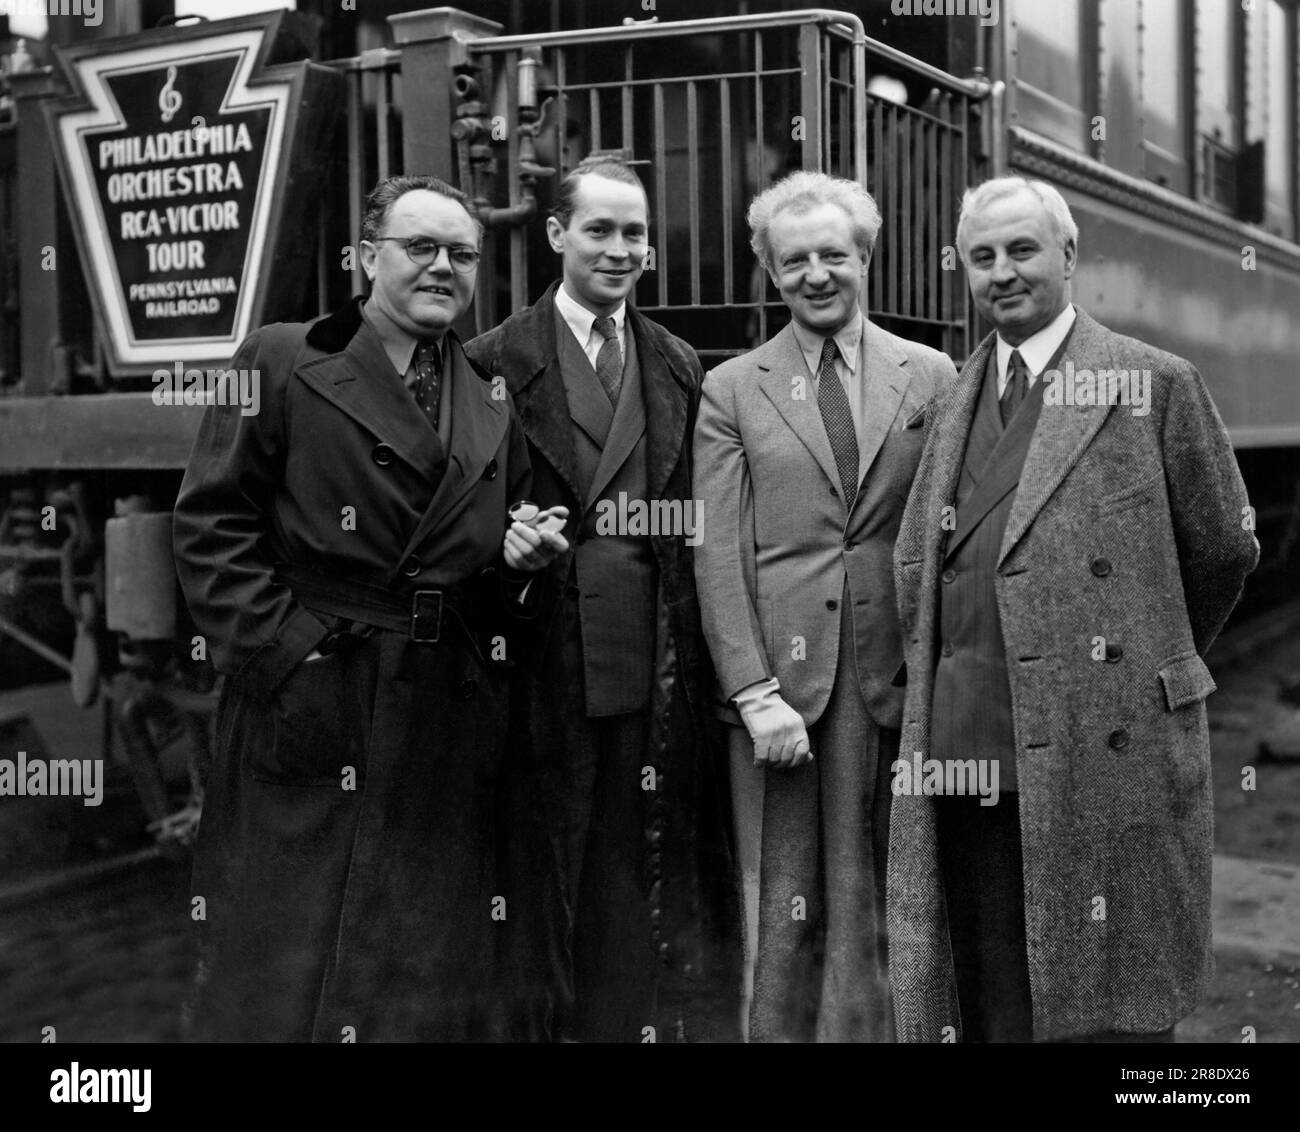 Los Angeles, California,  1936. Noted conductor of the Philadelphia Orchestra, Leopold Stokowski arrives in LA on the RCA-Victor Tour with L-R: Merle Armitage, Franchot Tone, Stokowski, and Charles L Wagner. Stock Photo